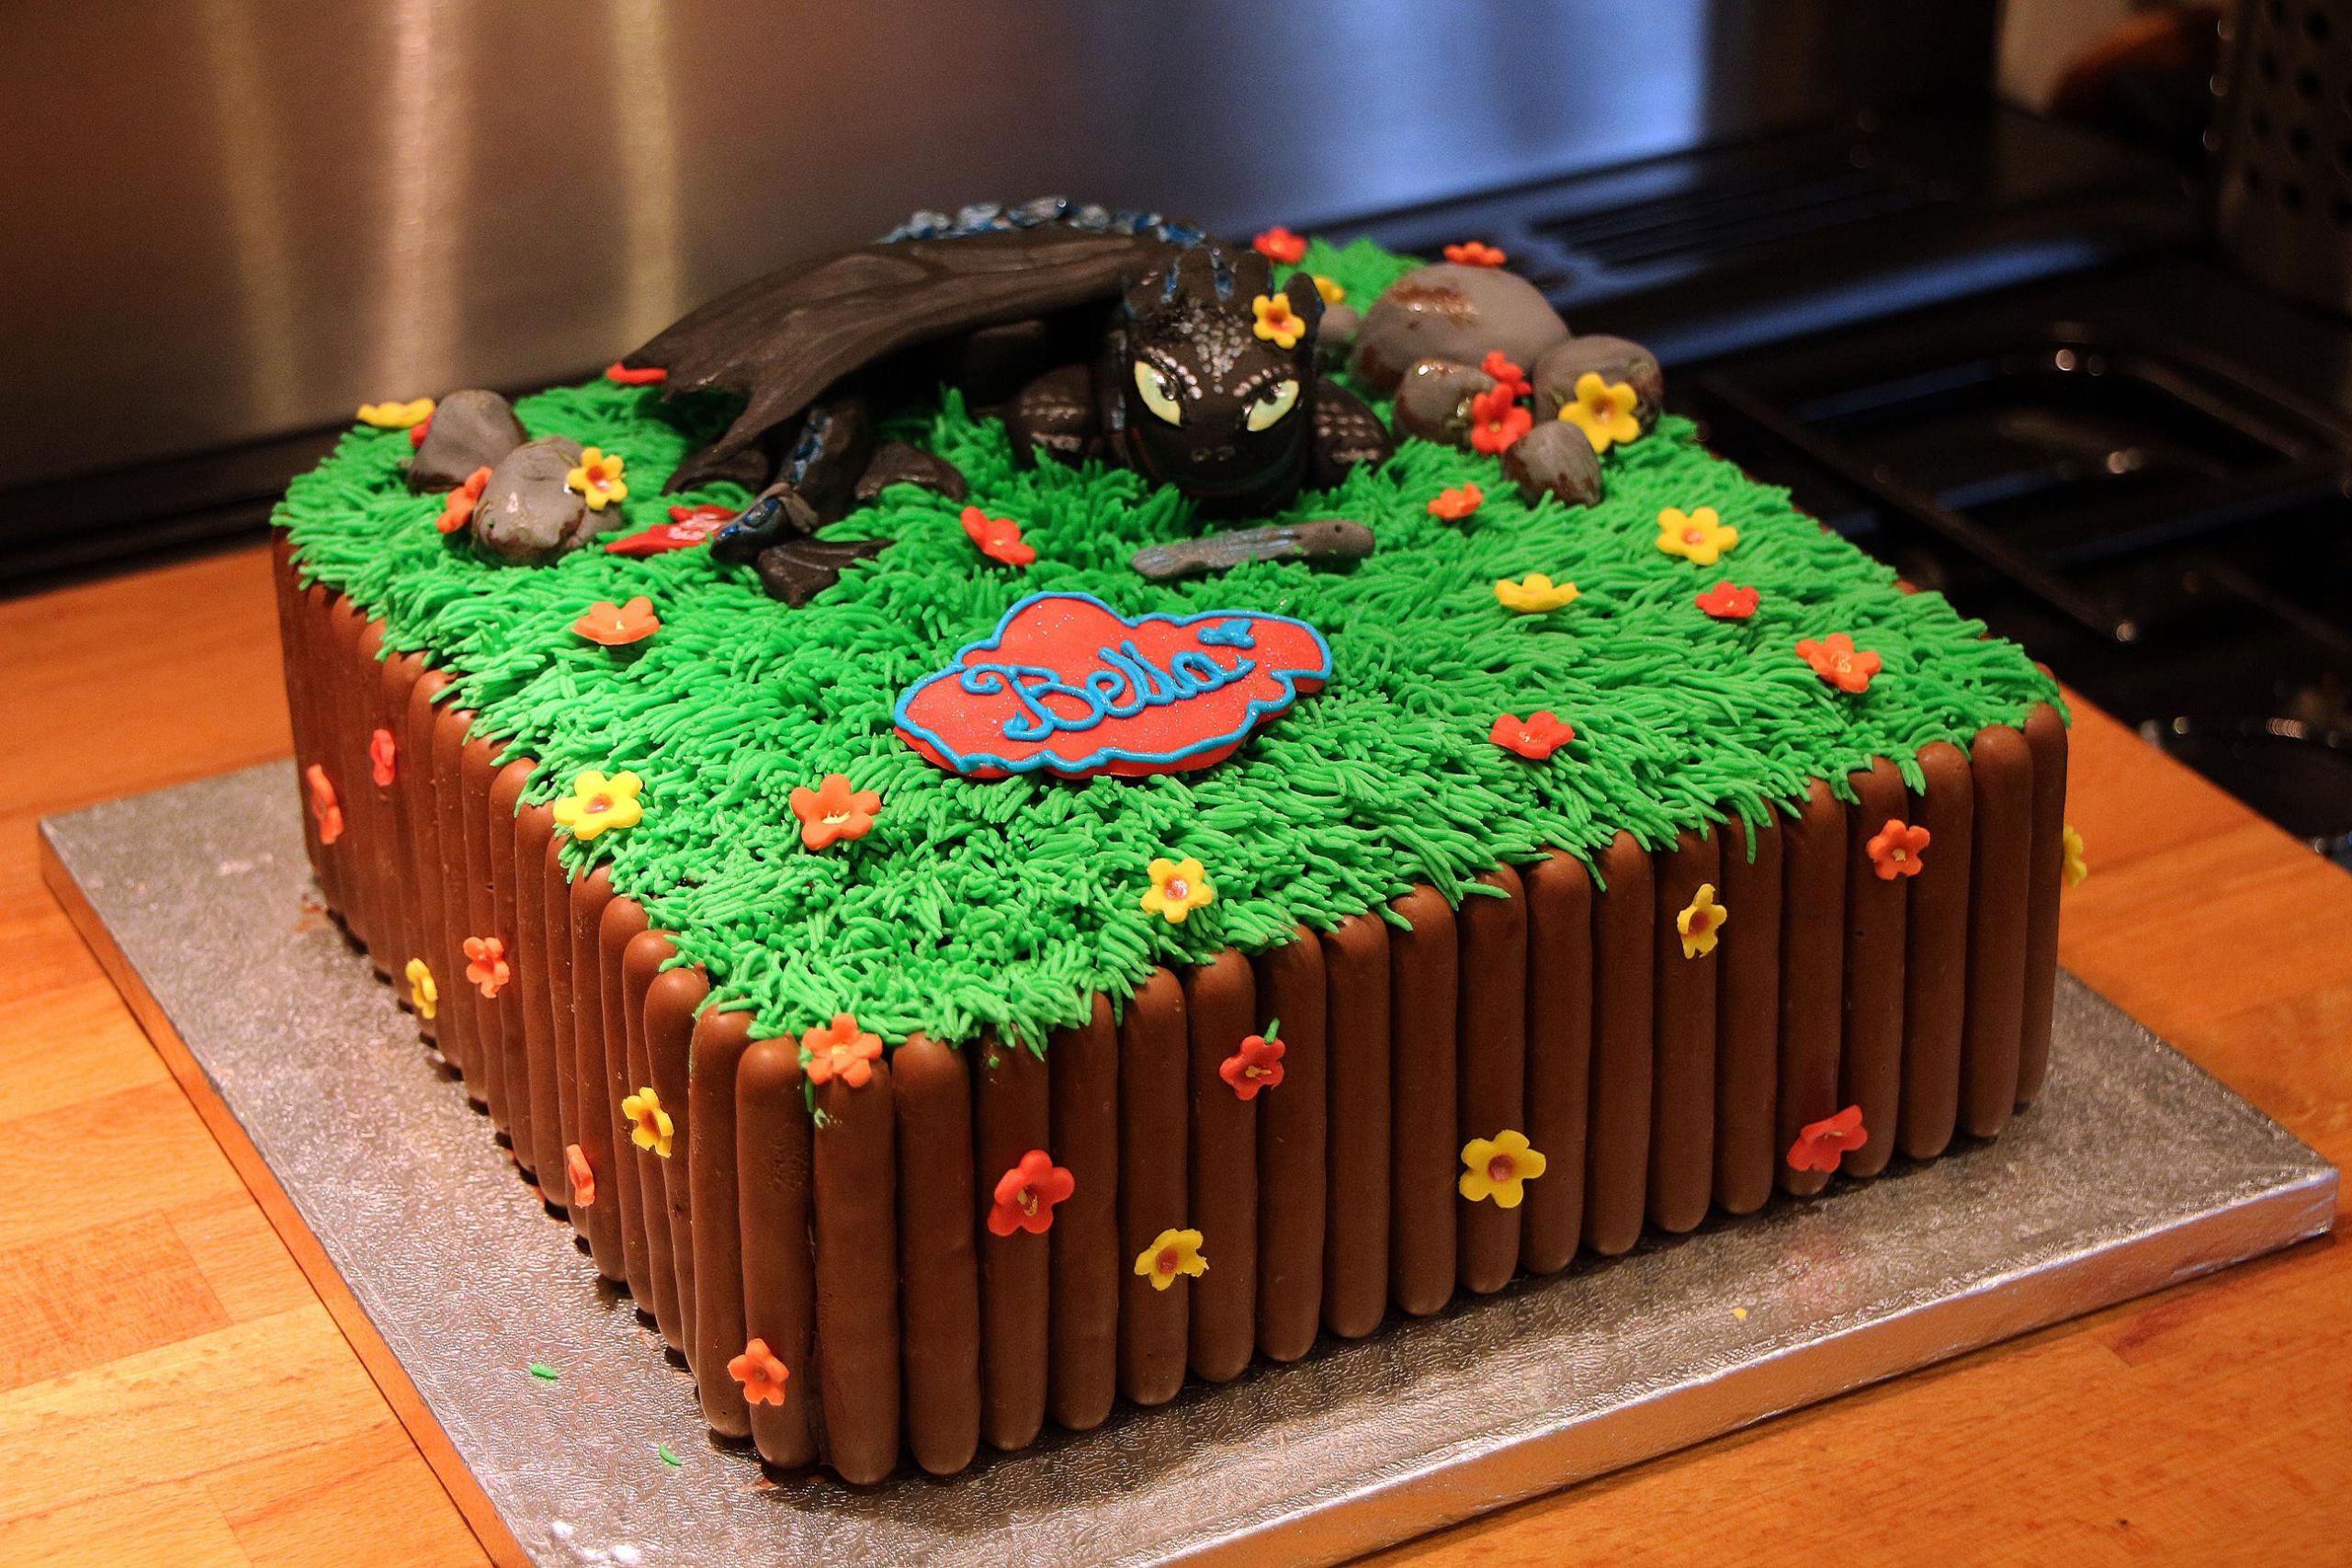 How To Train Your Dragon Birthday Cake
 How to Train Your Dragon ‘Toothless’ Cake